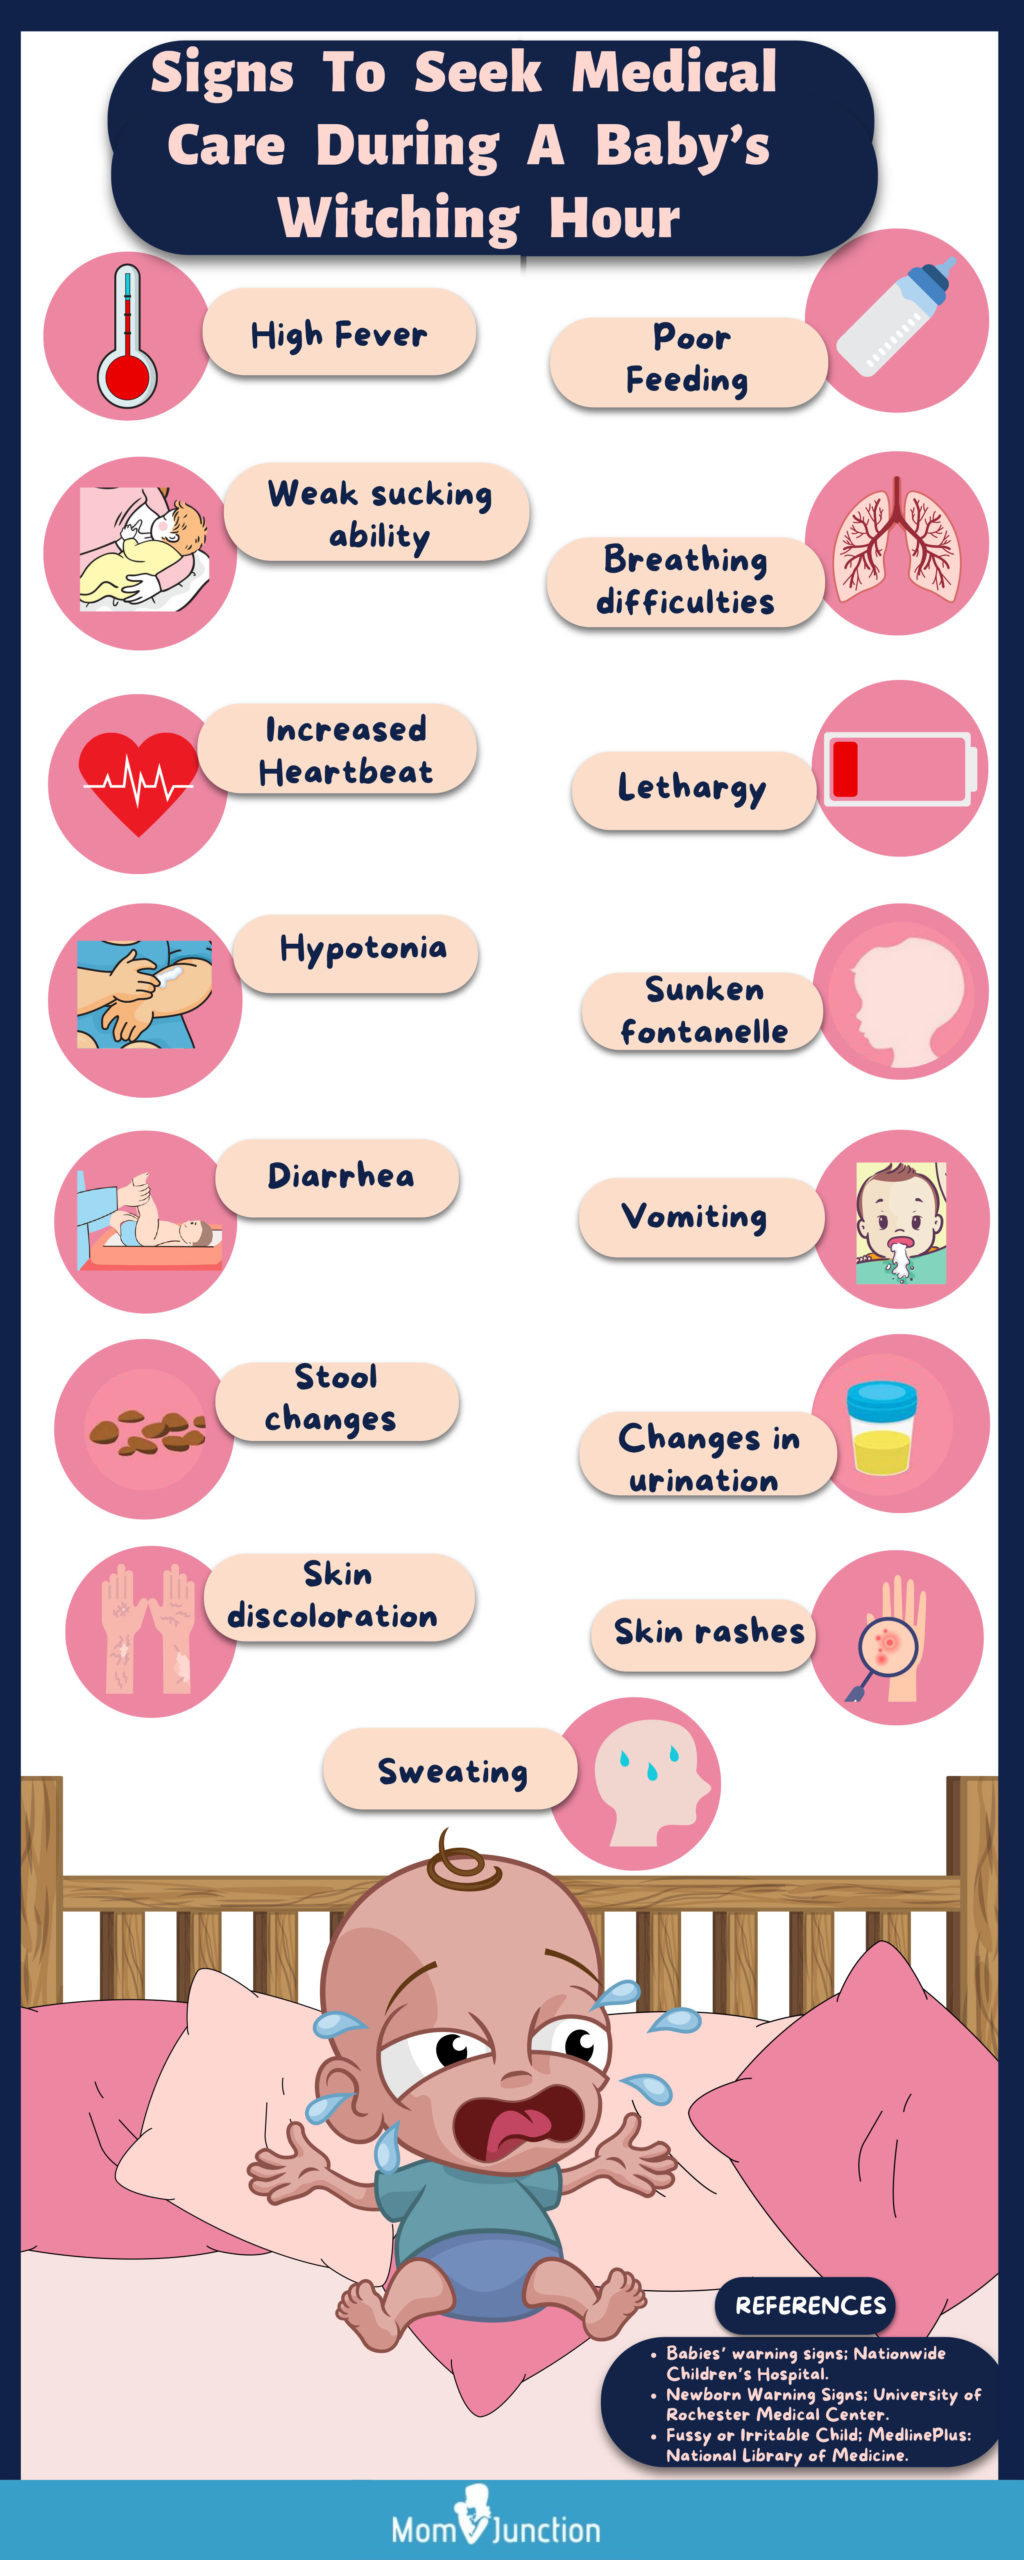 signs to seek medical care during a baby's witching hour (infographic)